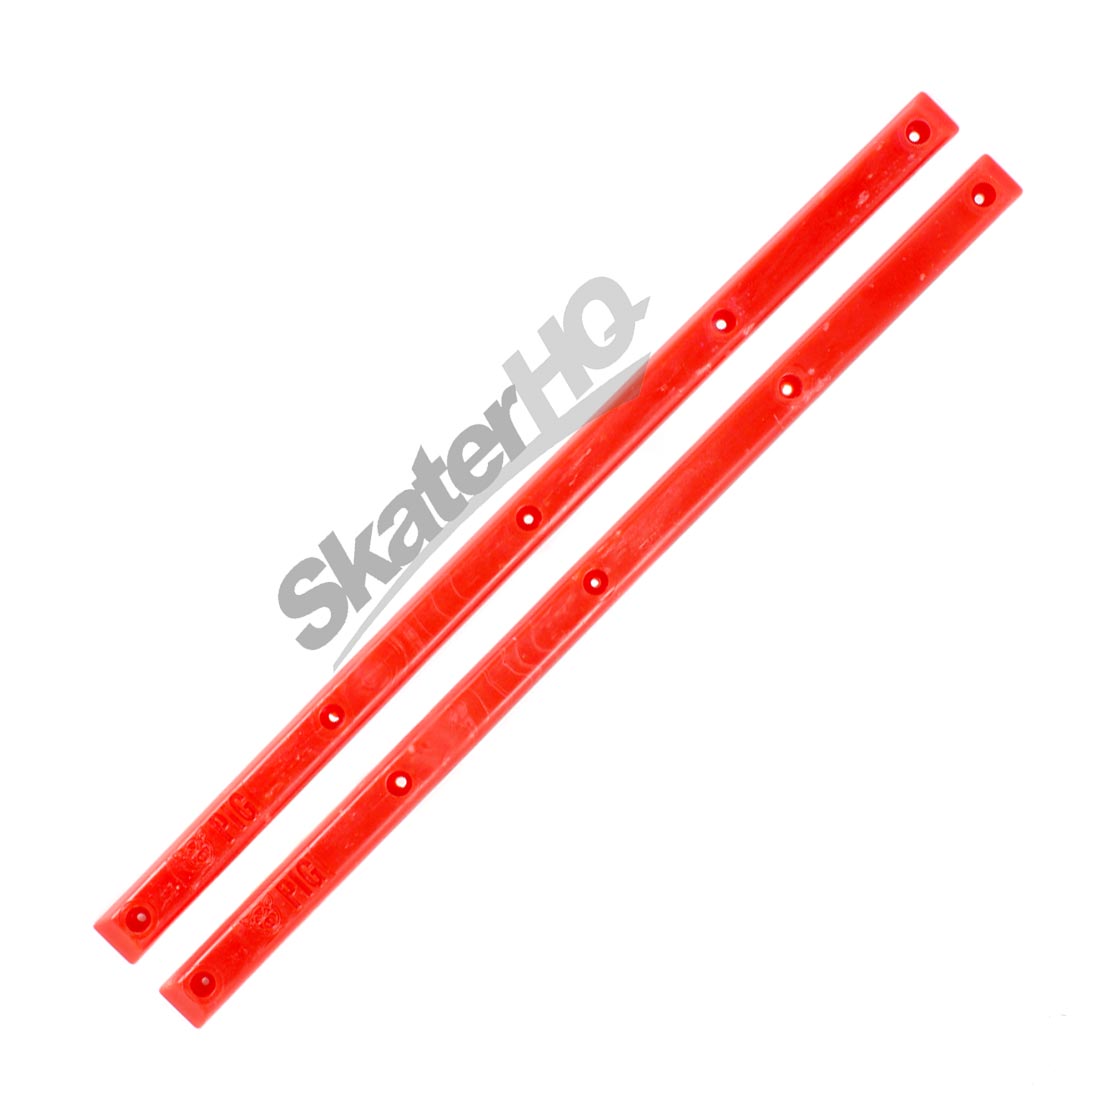 PIG Rails - Red Skateboard Hardware and Parts